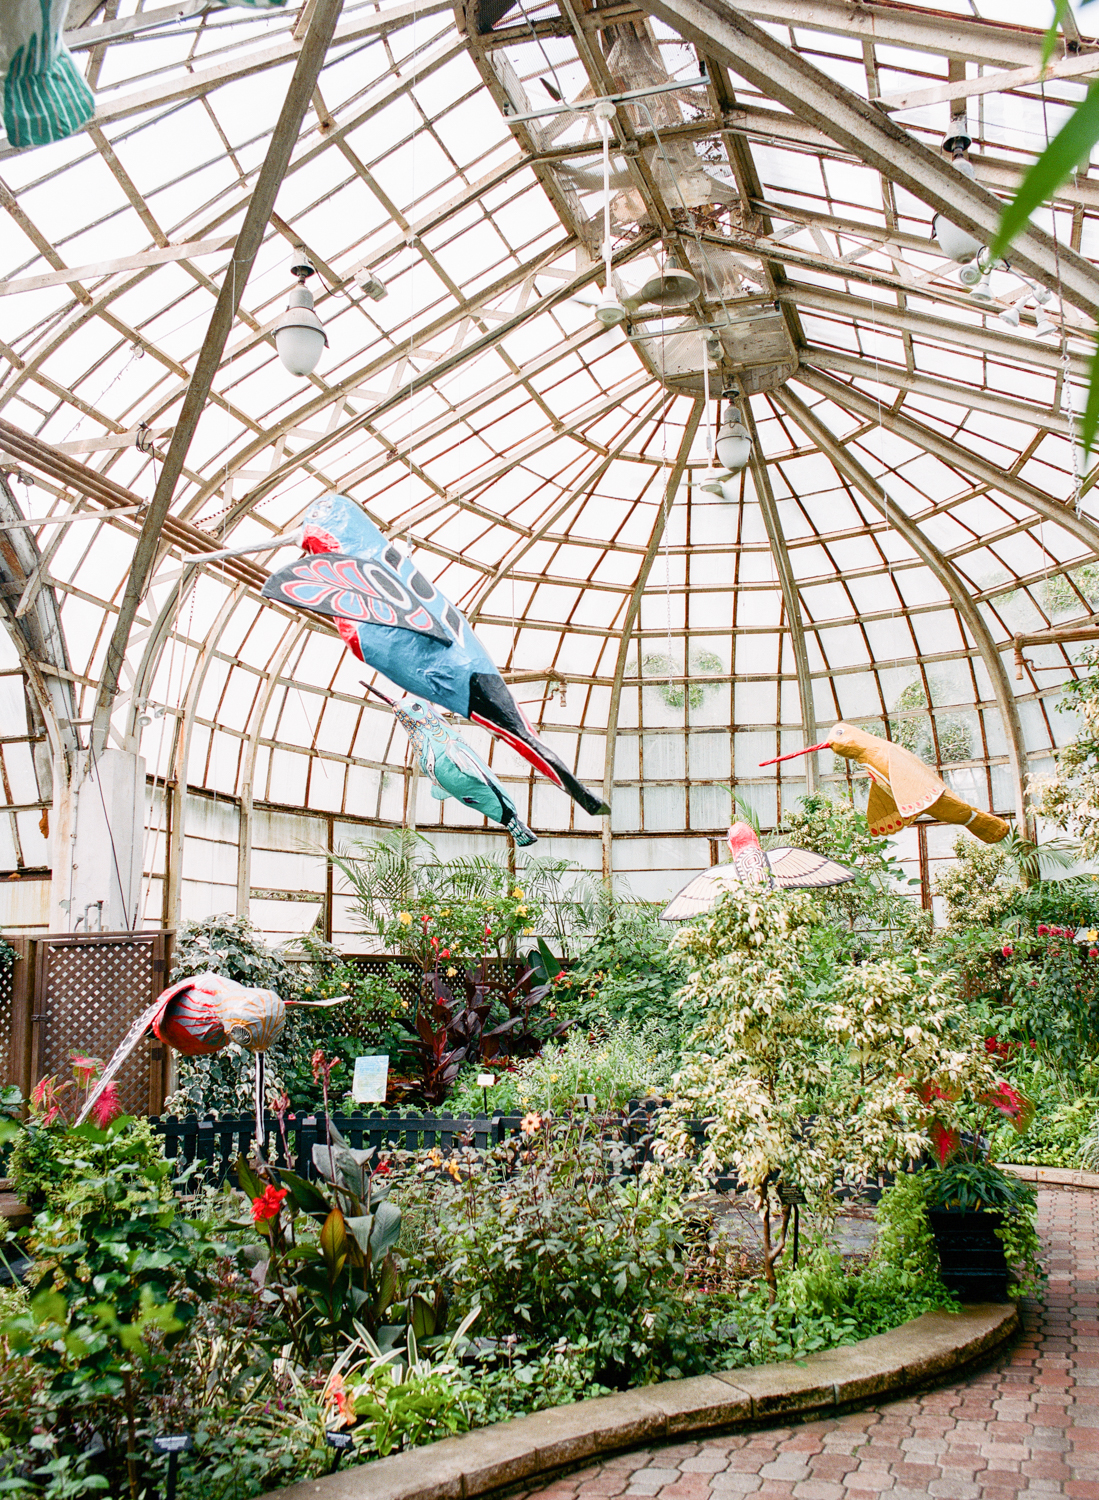 Lincoln Park Conservatory, Chicago